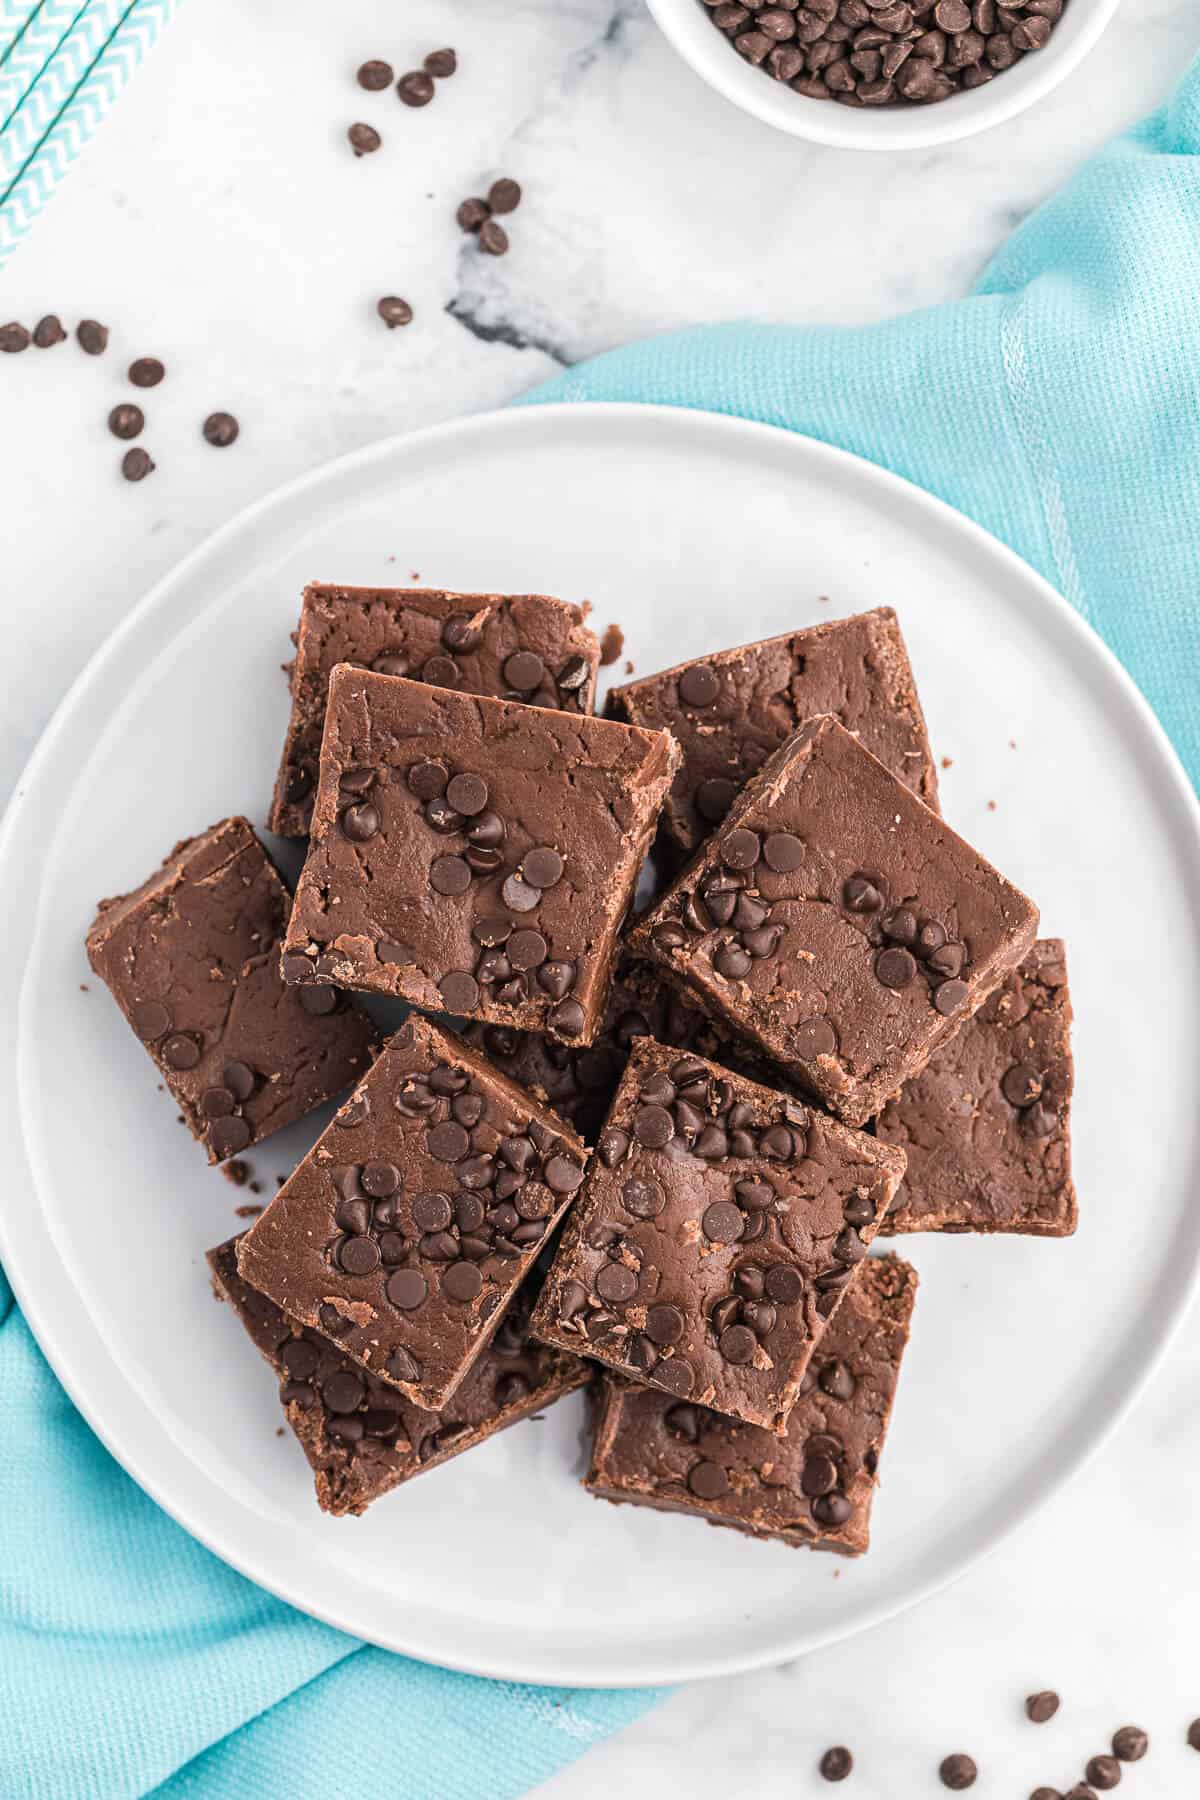 Chocolate Cake Batter Fudge - This easy fudge recipe is no bake and made with a box of cake mix. Each bite is rich and fudgy!